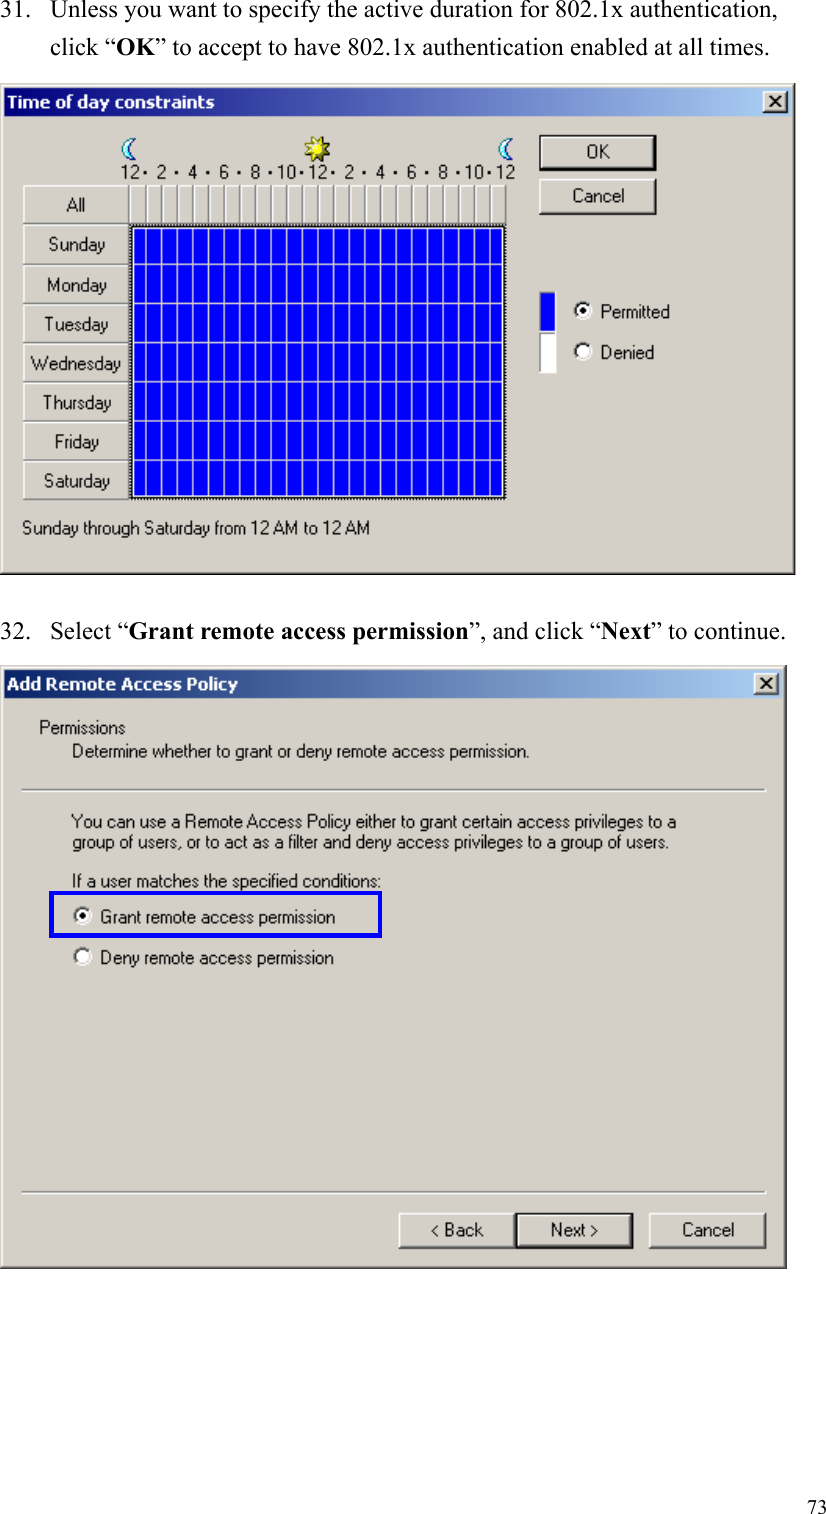 7331. Unless you want to specify the active duration for 802.1x authentication,click “OK” to accept to have 802.1x authentication enabled at all times.32. Select “Grant remote access permission”, and click “Next” to continue.